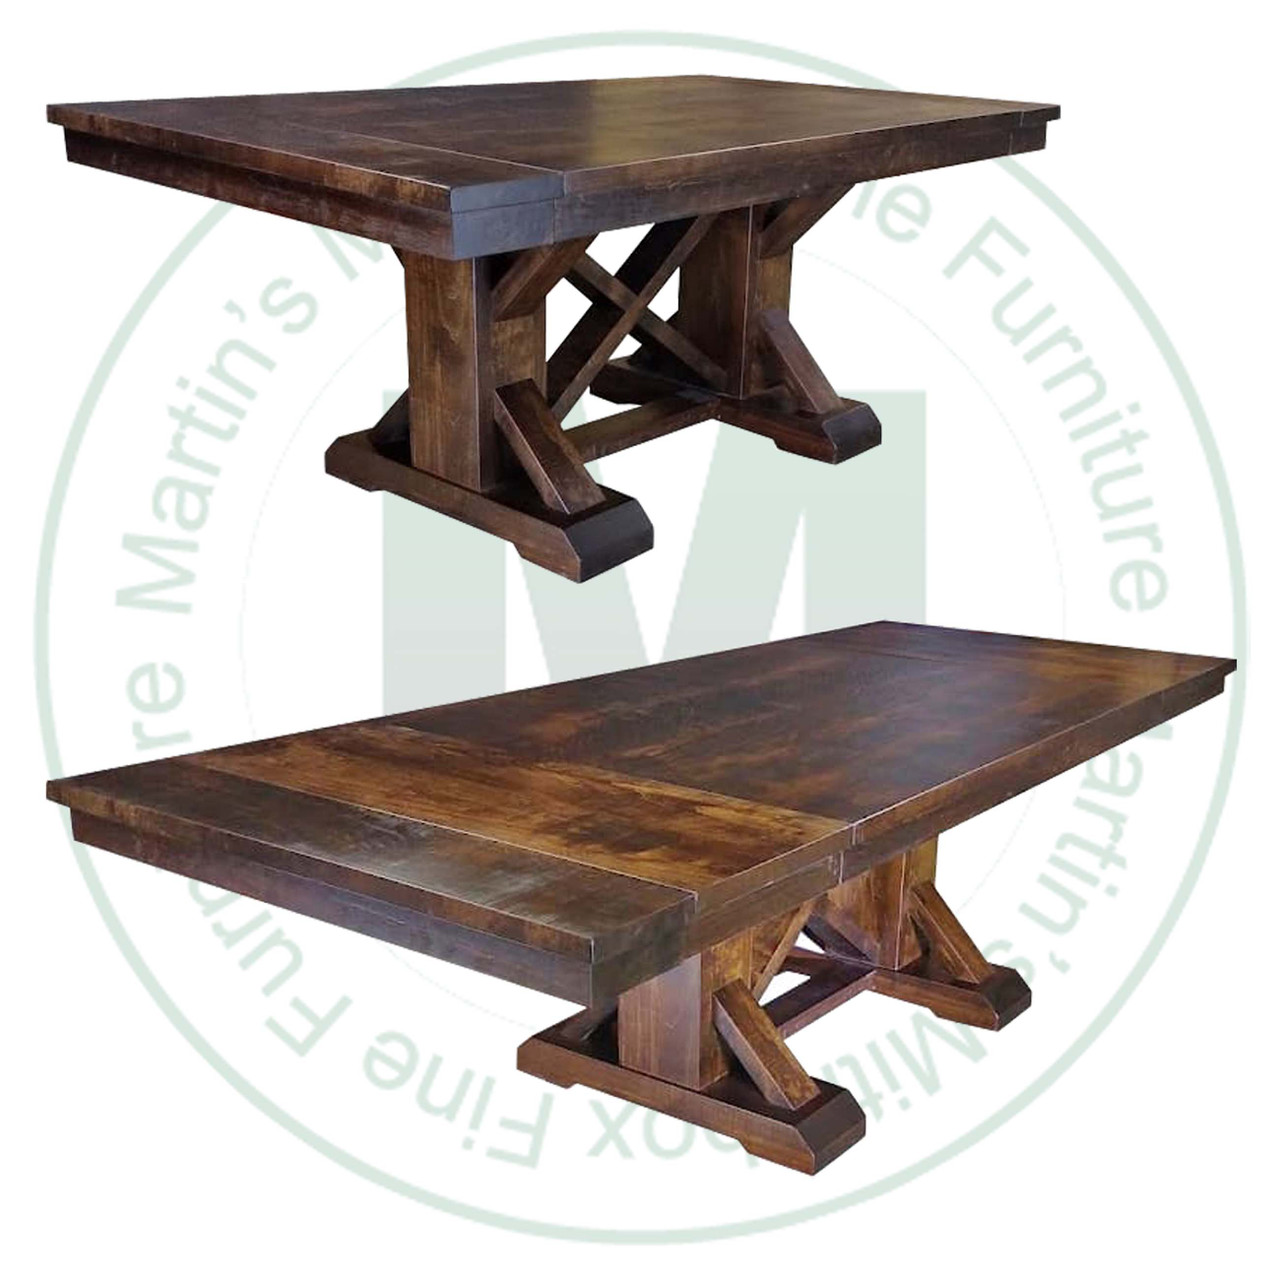 Wormy Maple Bonanza End Extension Pedestal Table 48'' Deep x 96'' Wide x 30'' High With 2 - 16'' End Leaves